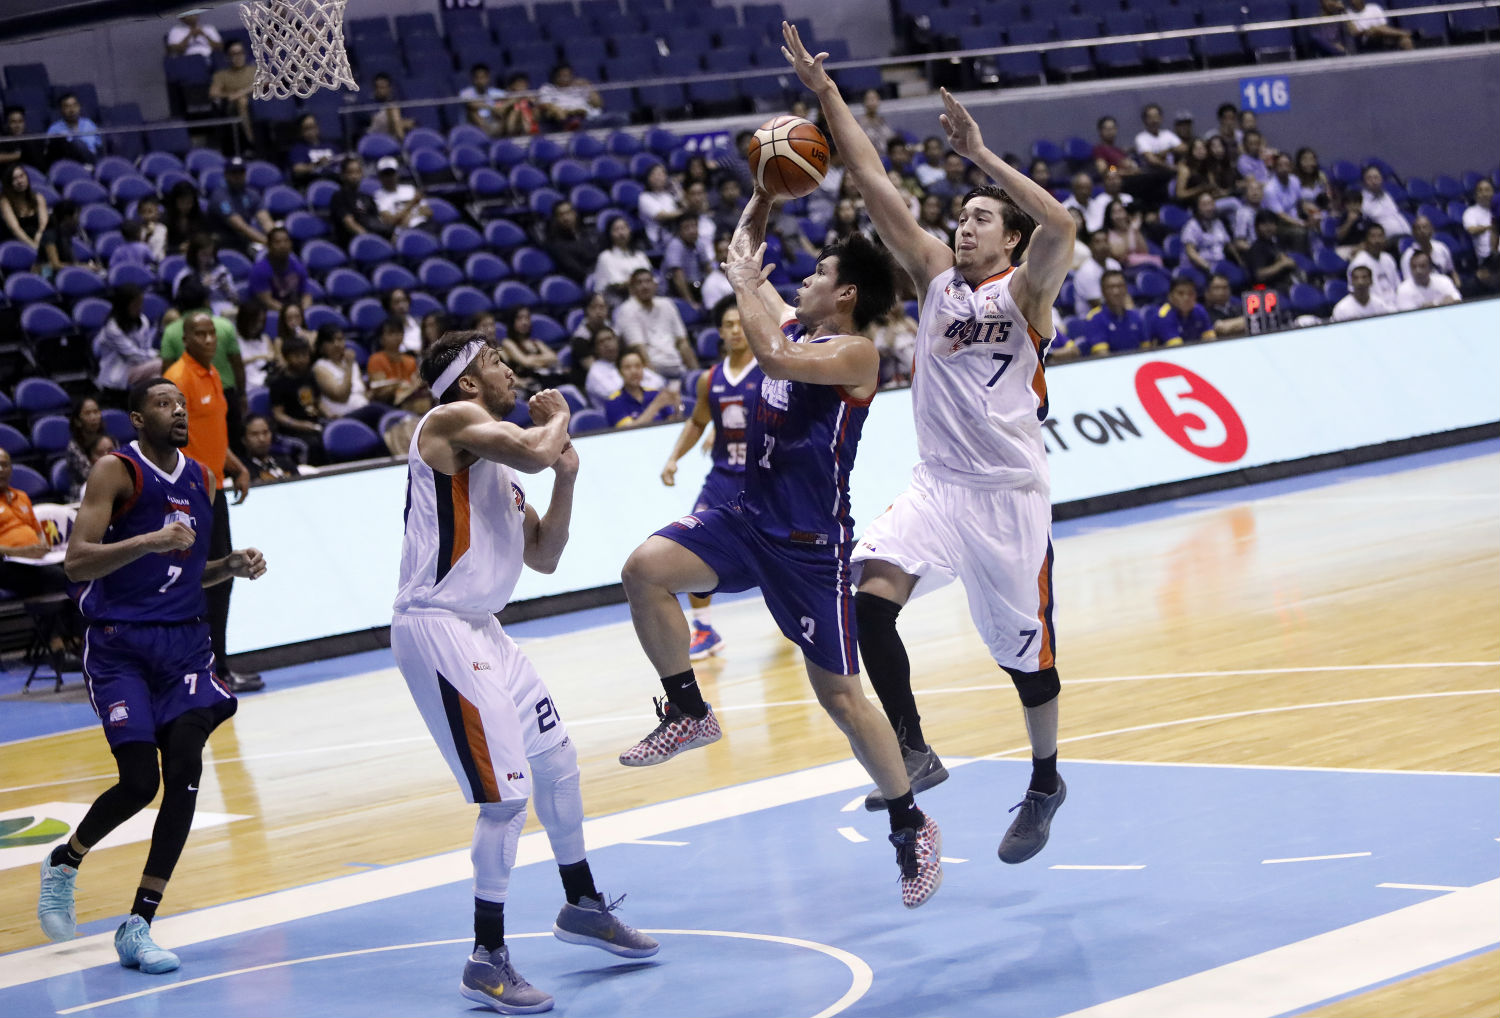 STRONG START. The Meralco Bolts open their 2018 Commissioner's Cup campaign on a high note. Photo by PBA Images 